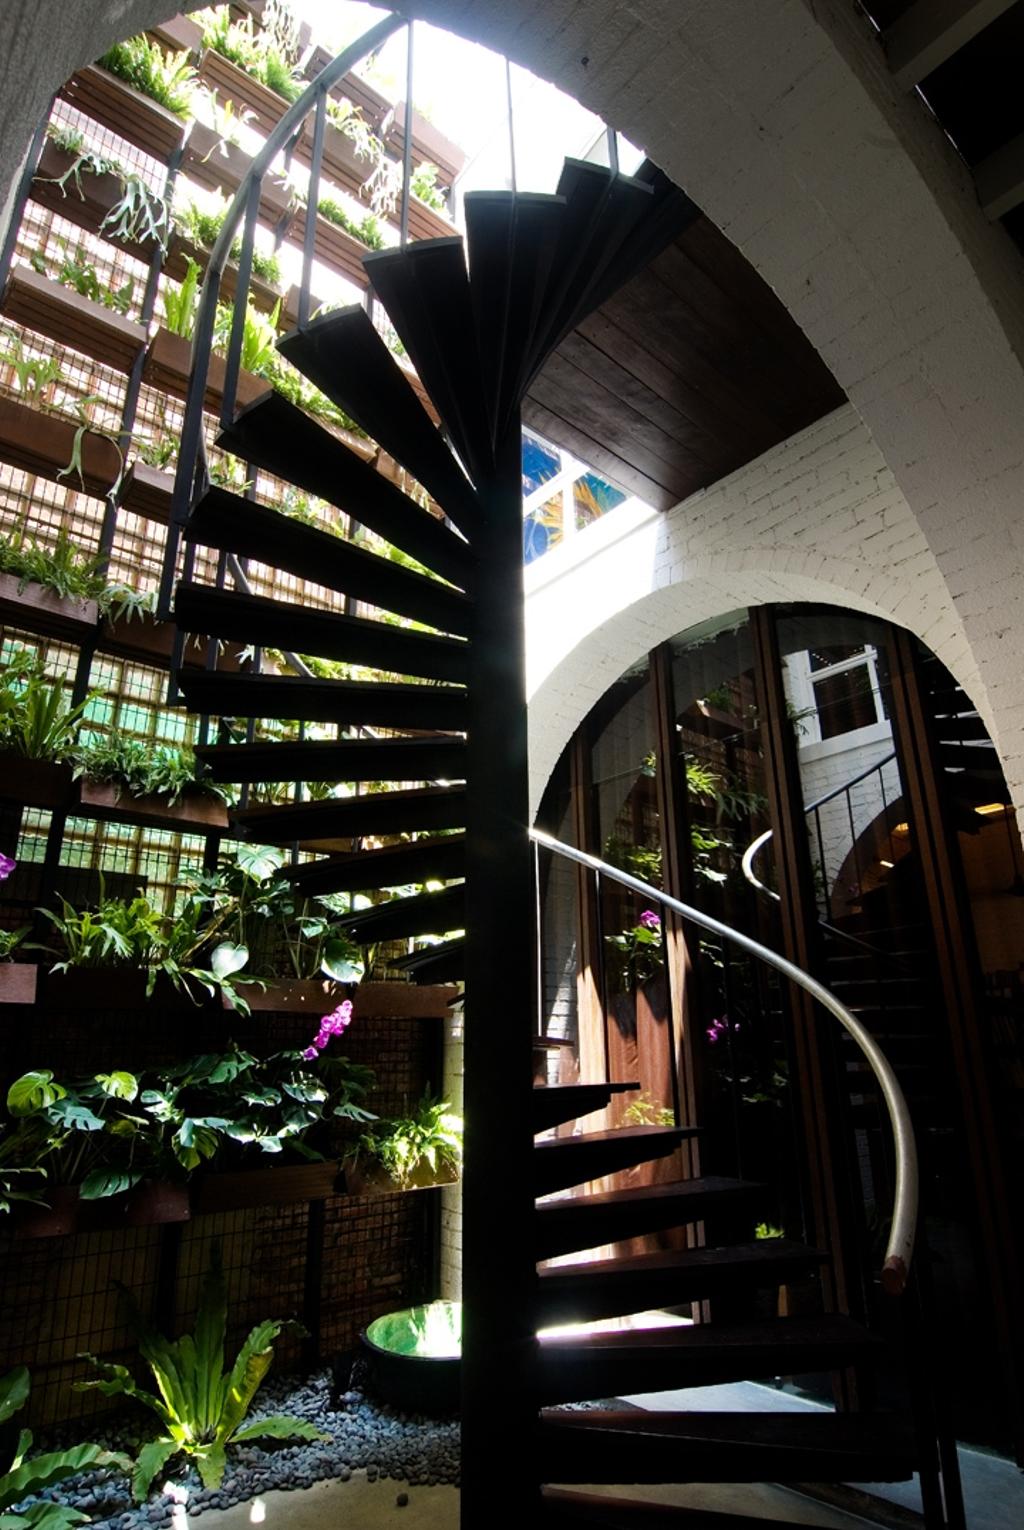 Sophia Office, Commercial, Architect, Aamer Architects, Contemporary, Stairway, Black Stairway, Twisted Stairway, Curve Stairway, Red Brick Wall, White Brick, Plantation, Arched Wall, Flora, Jar, Plant, Potted Plant, Pottery, Vase